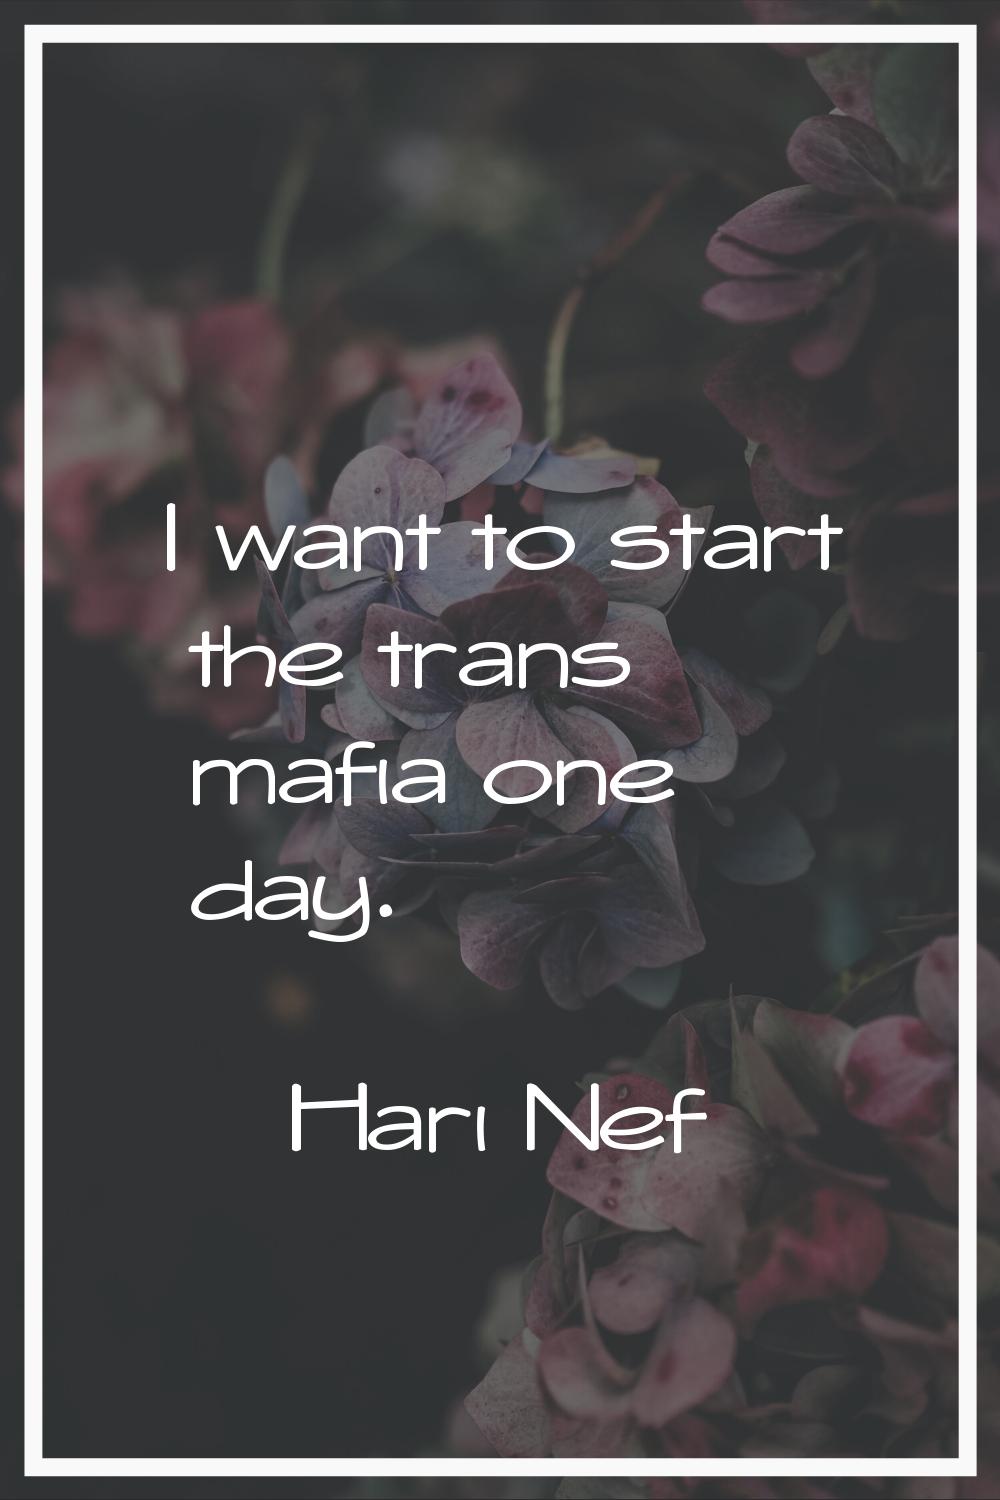 I want to start the trans mafia one day.